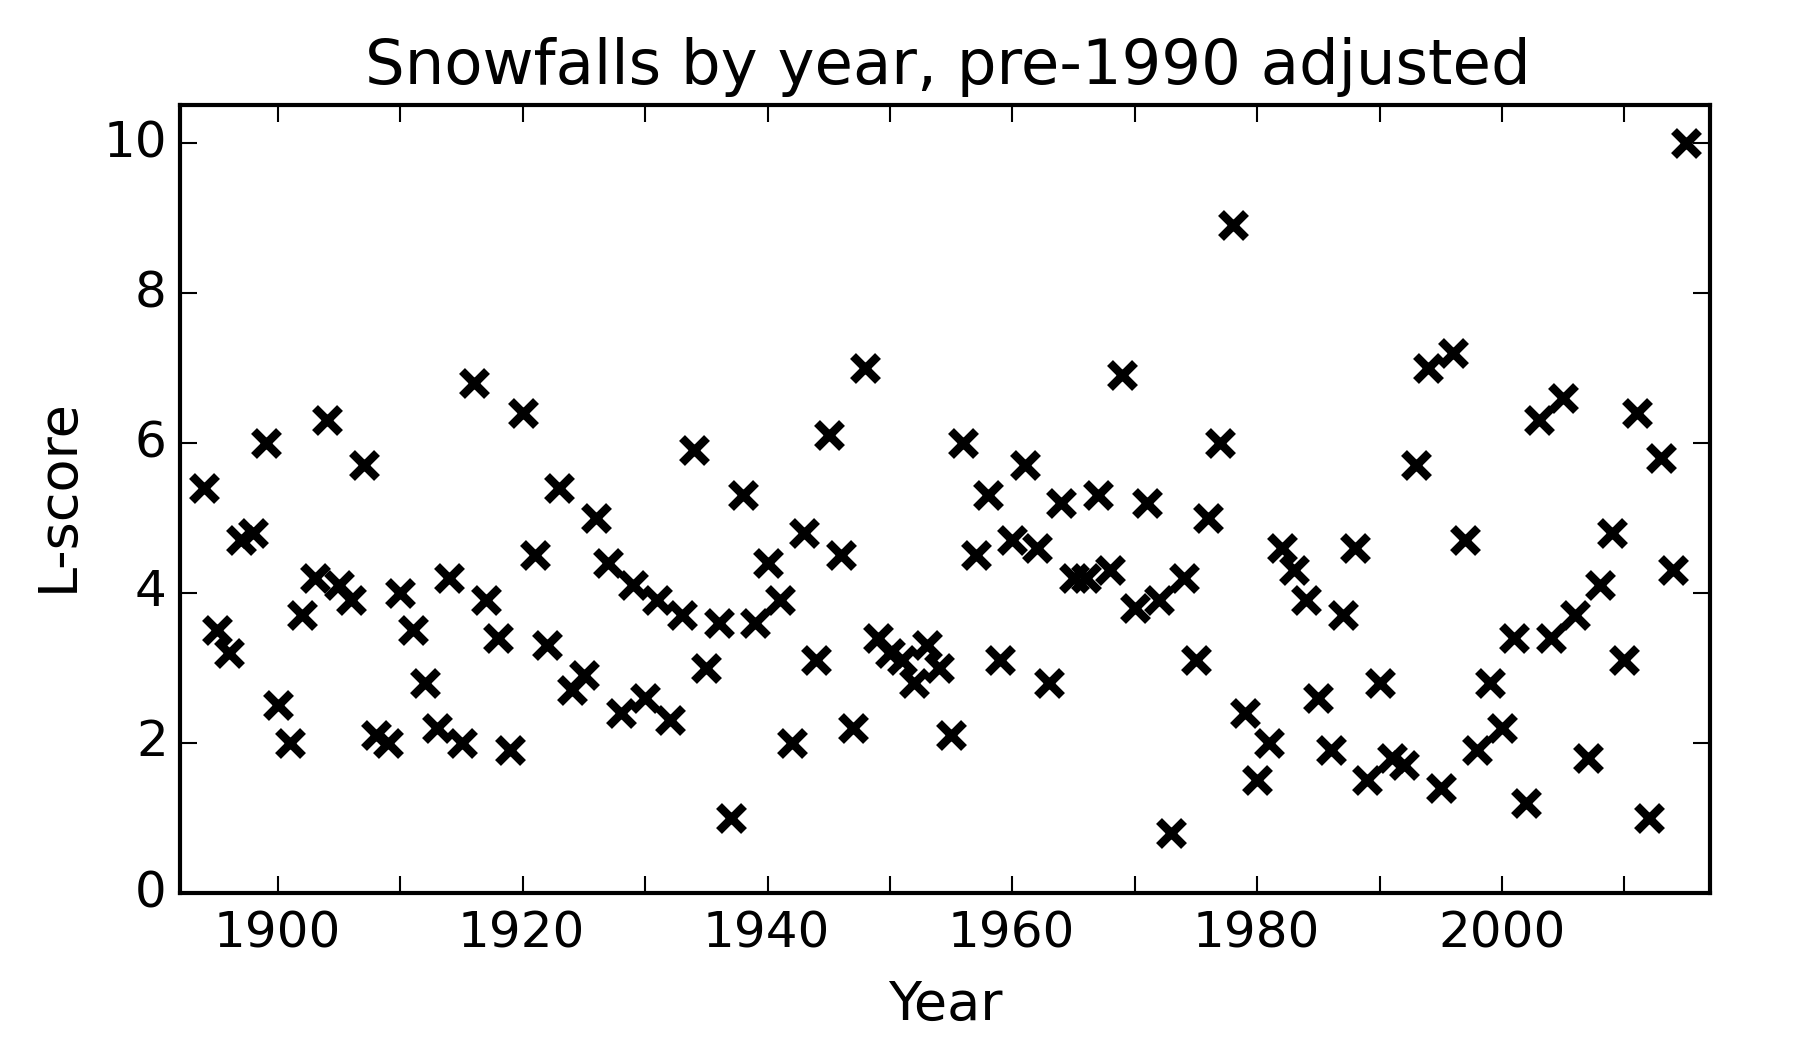 L-score by year, pre-1990 values adjusted